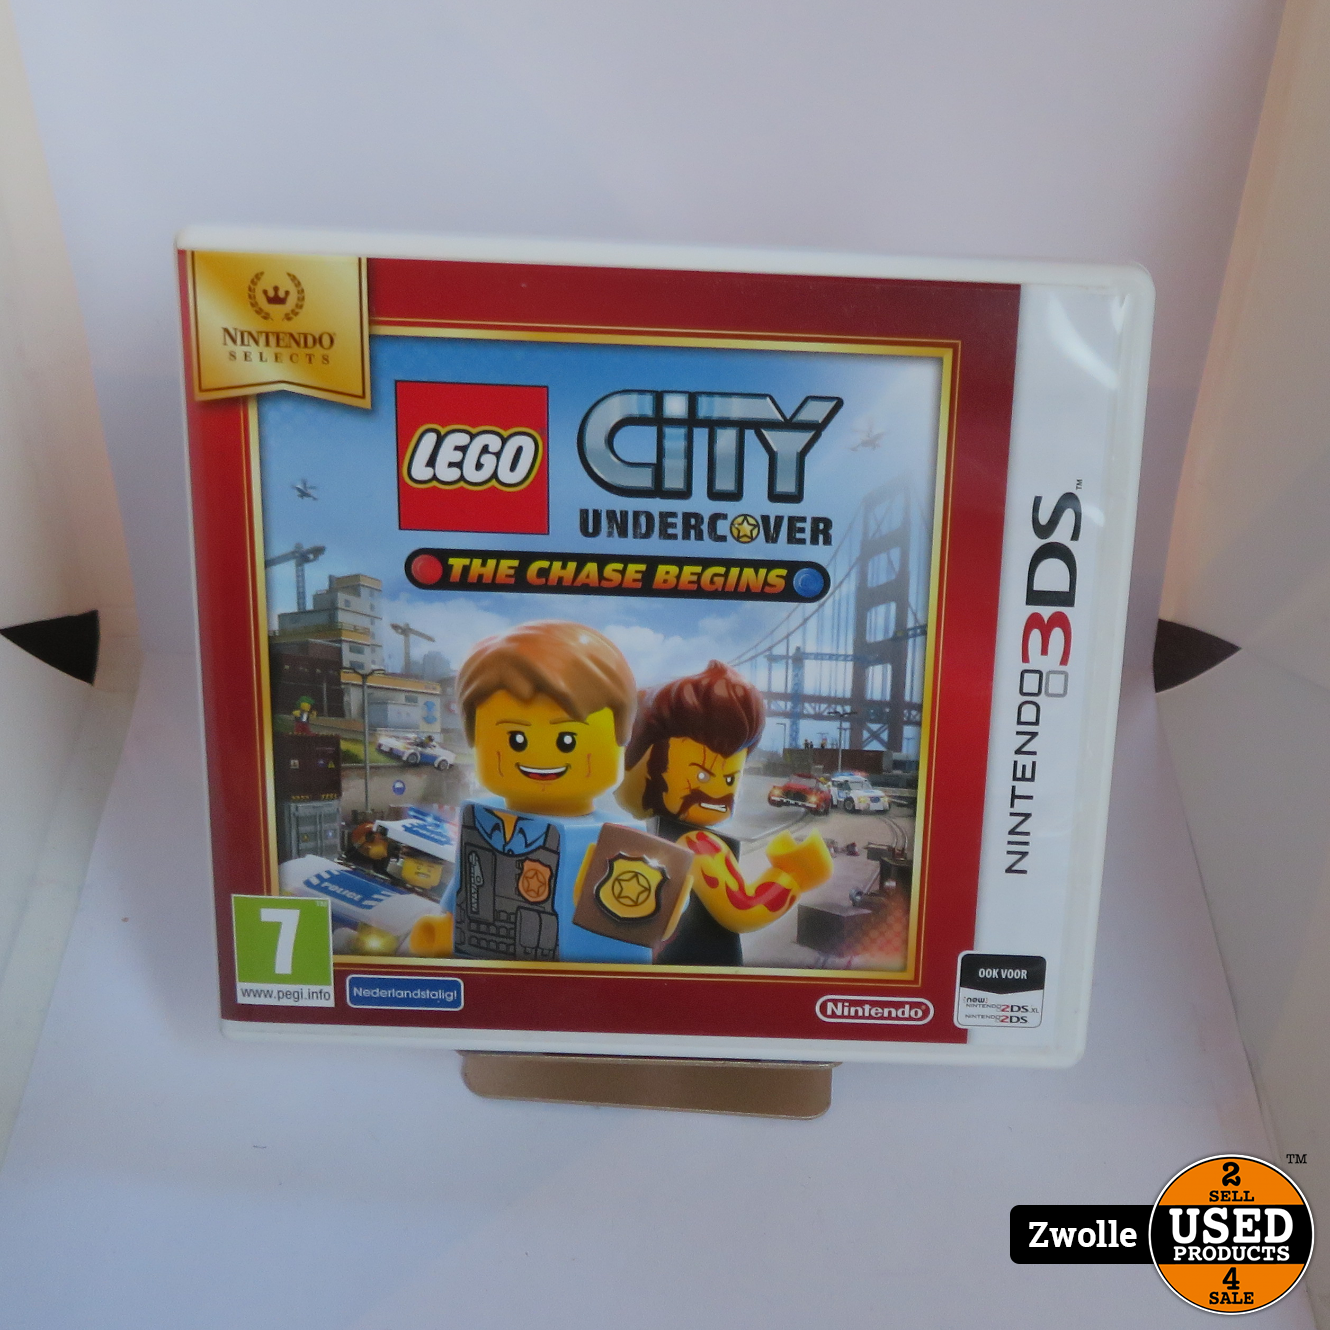 nintendo 3DS | LEGO city undercover - Used Products Zwolle